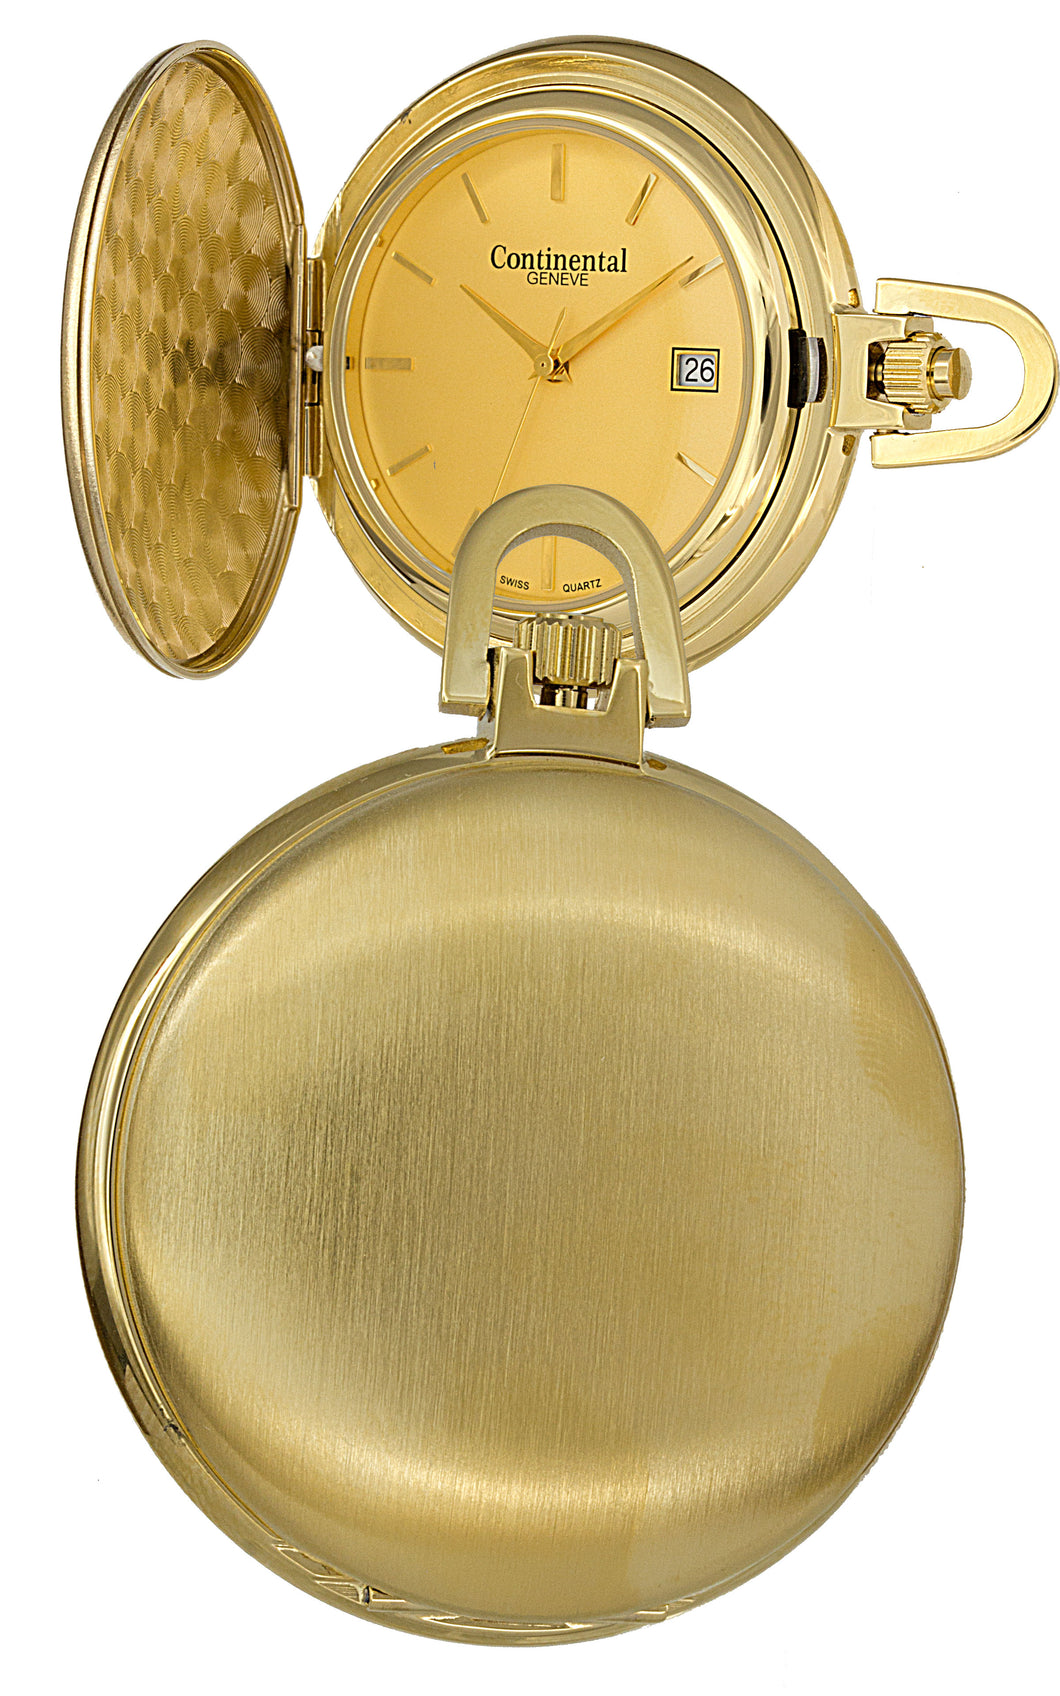 420055 Continental Geneve Pocket Watch with Date, Gold-tone Dial and Yellow Gold Plating